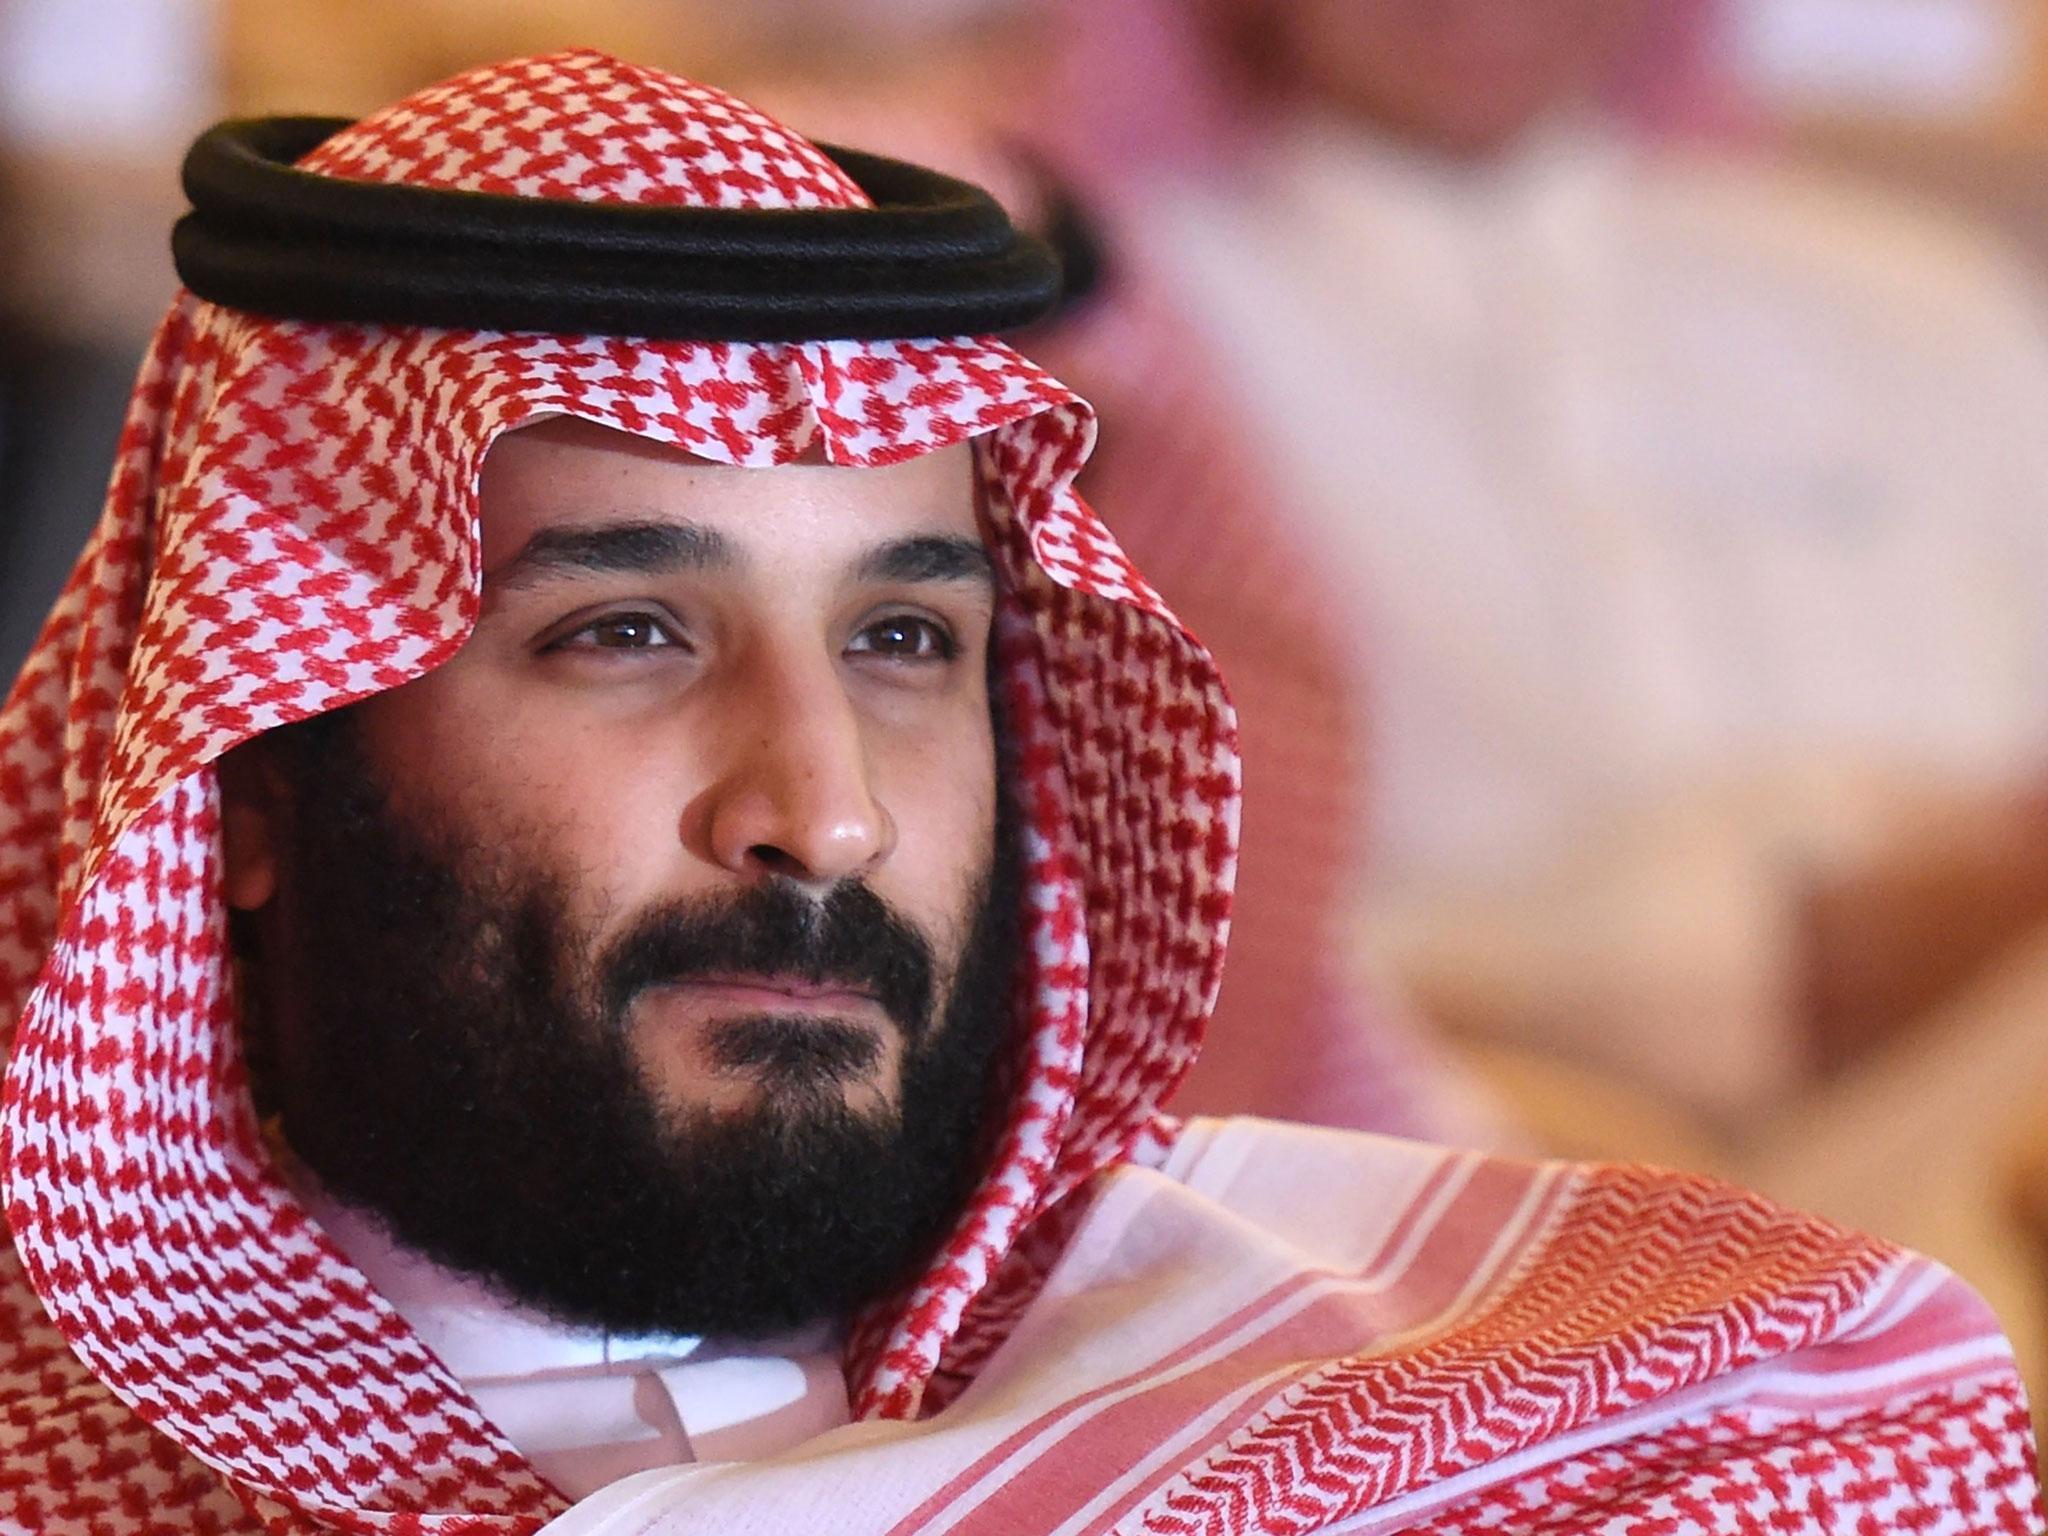 Mohammad bin Salman has made little secret of his intention to move Saudi Arabia back to moderate Islam